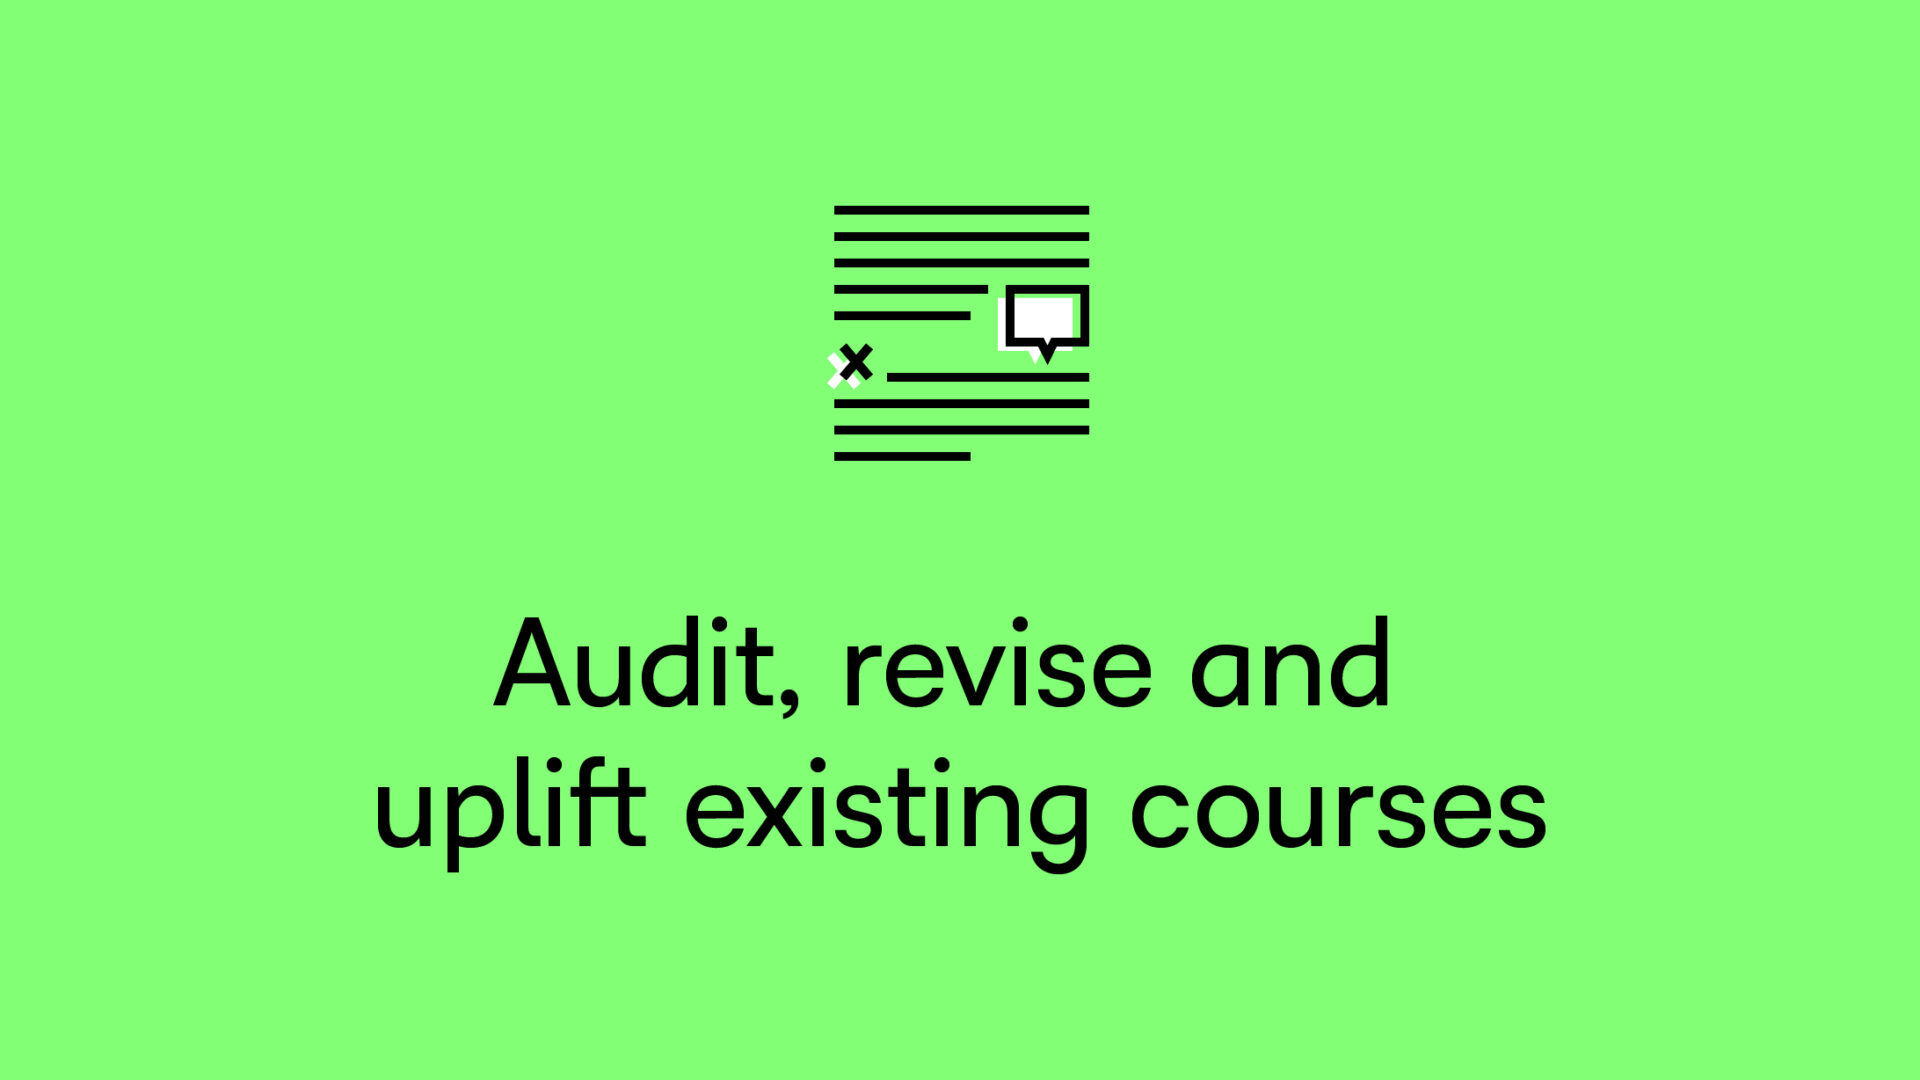 Audit, revise and uplift existing courses